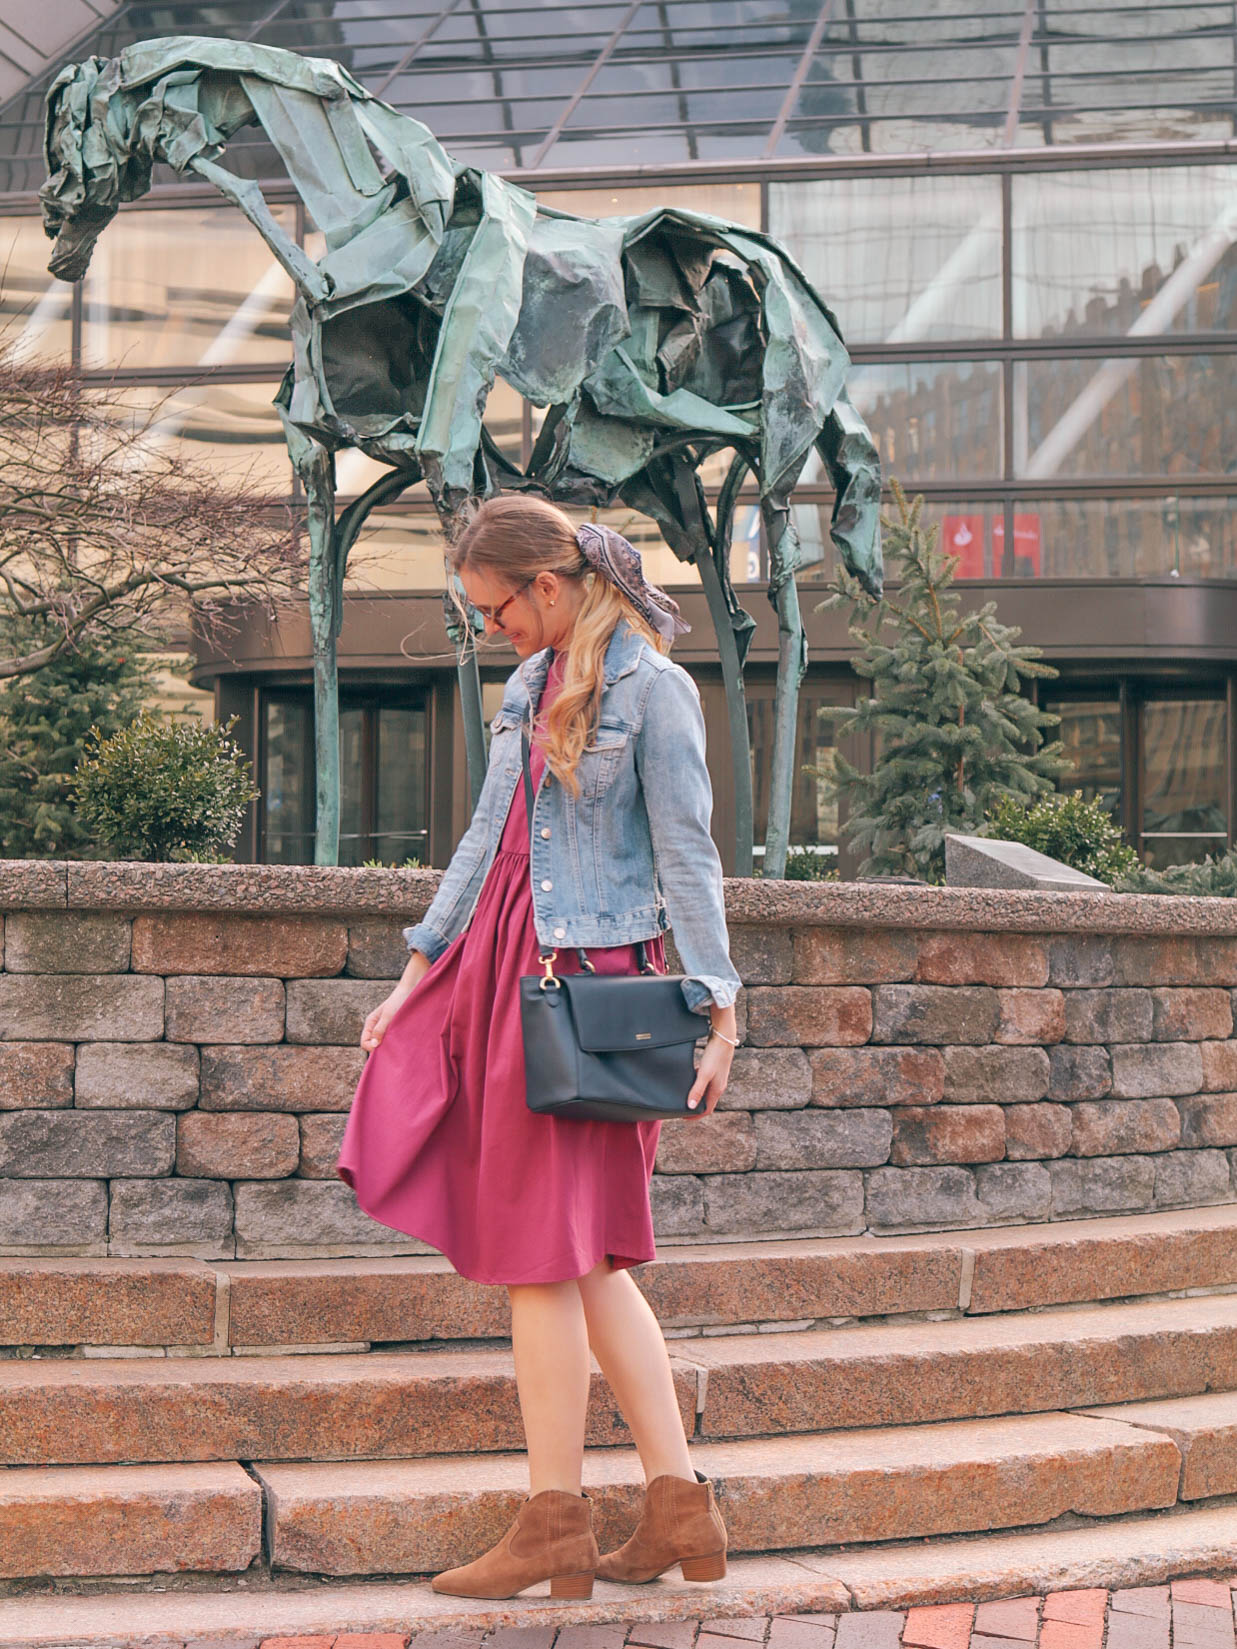 Windy Days in Boston featuring a Perfect Transition Shoe by SAS Shoemakers